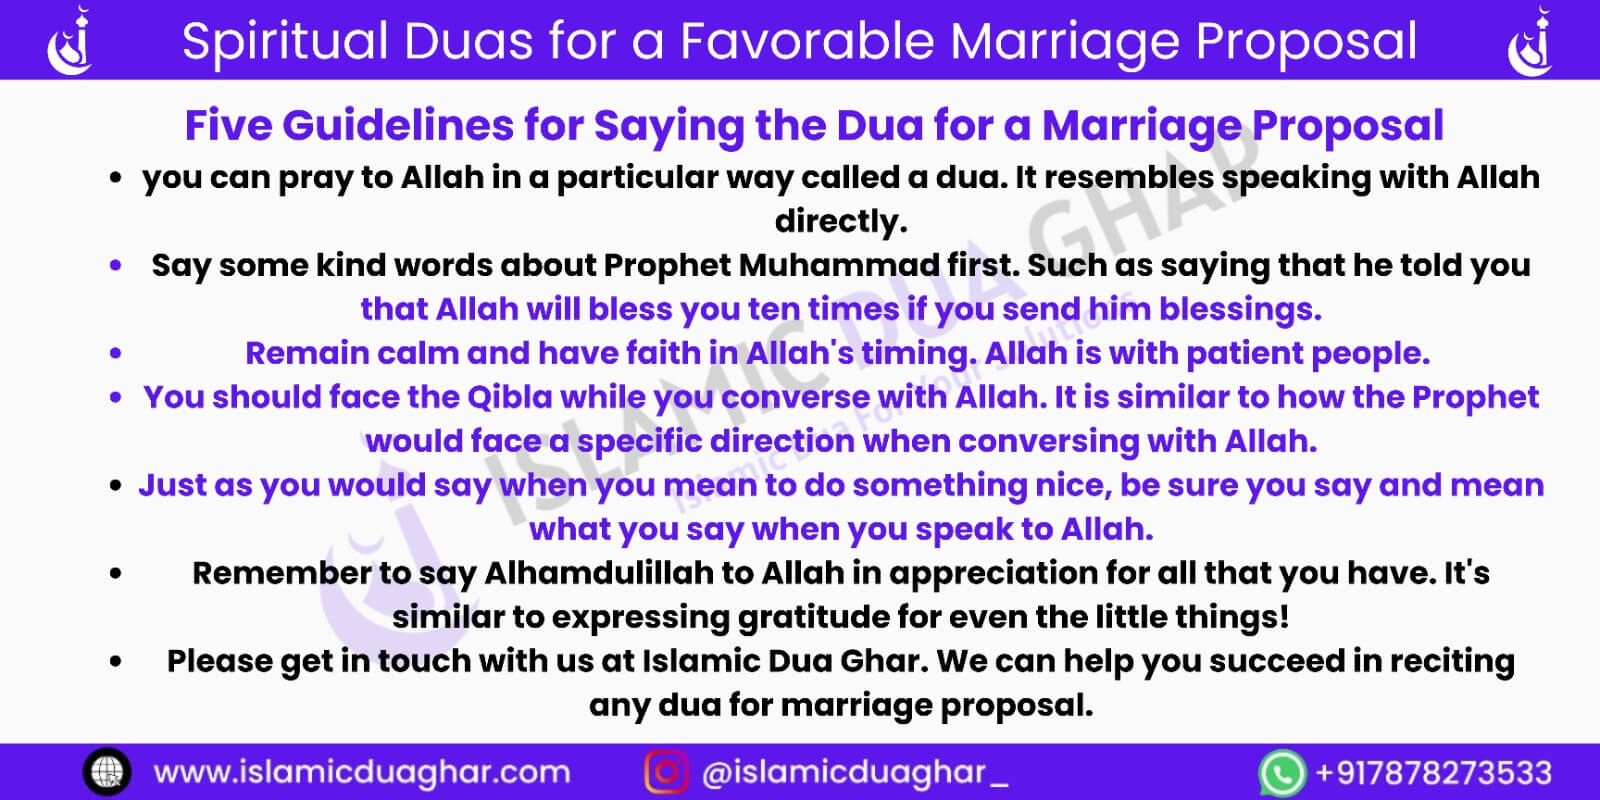 Dua for Marriage Proposal